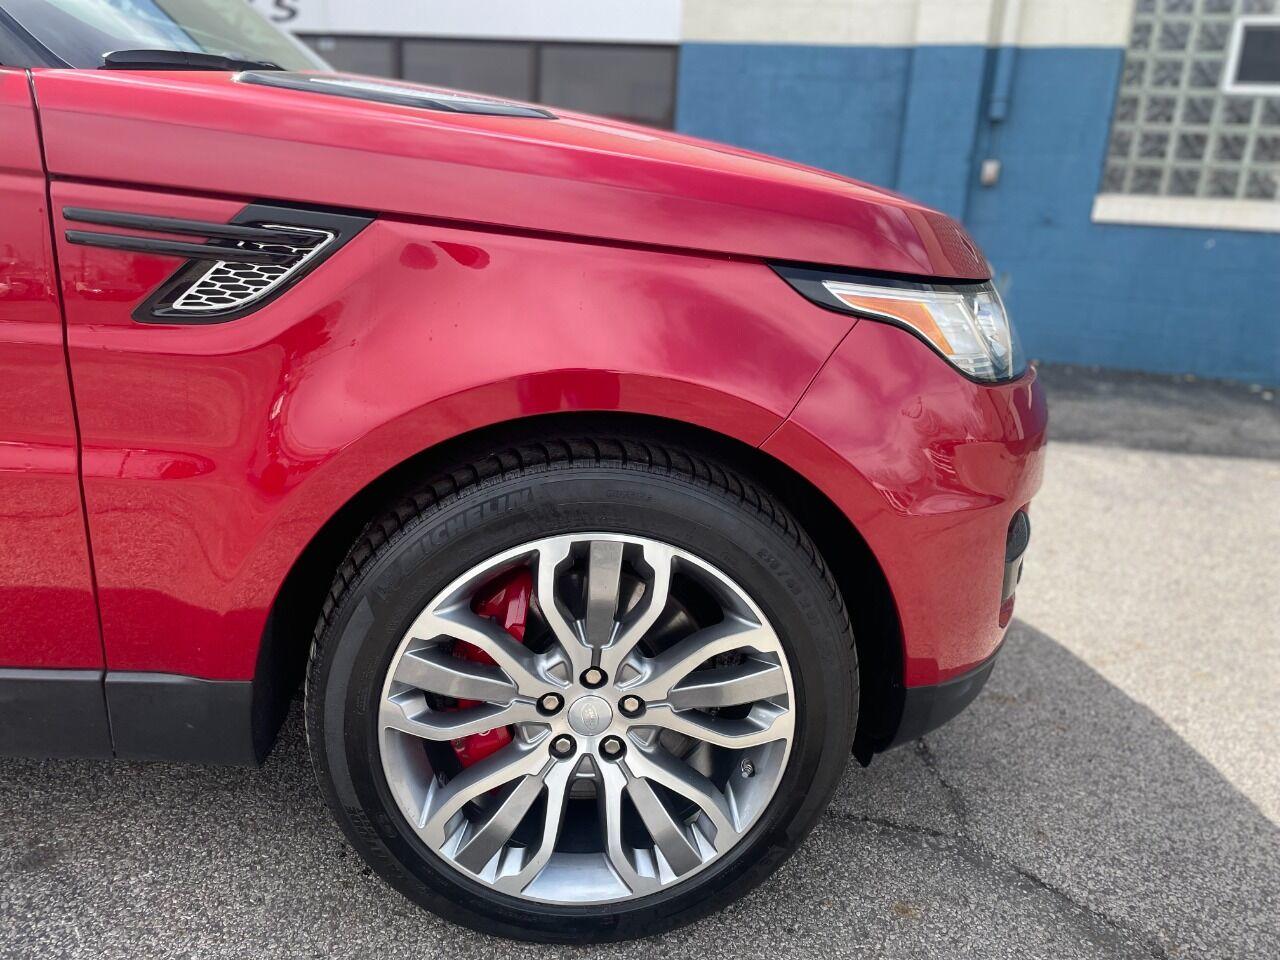 2015 Land Rover Range Rover Sport Supercharged 4x4 4dr SUV